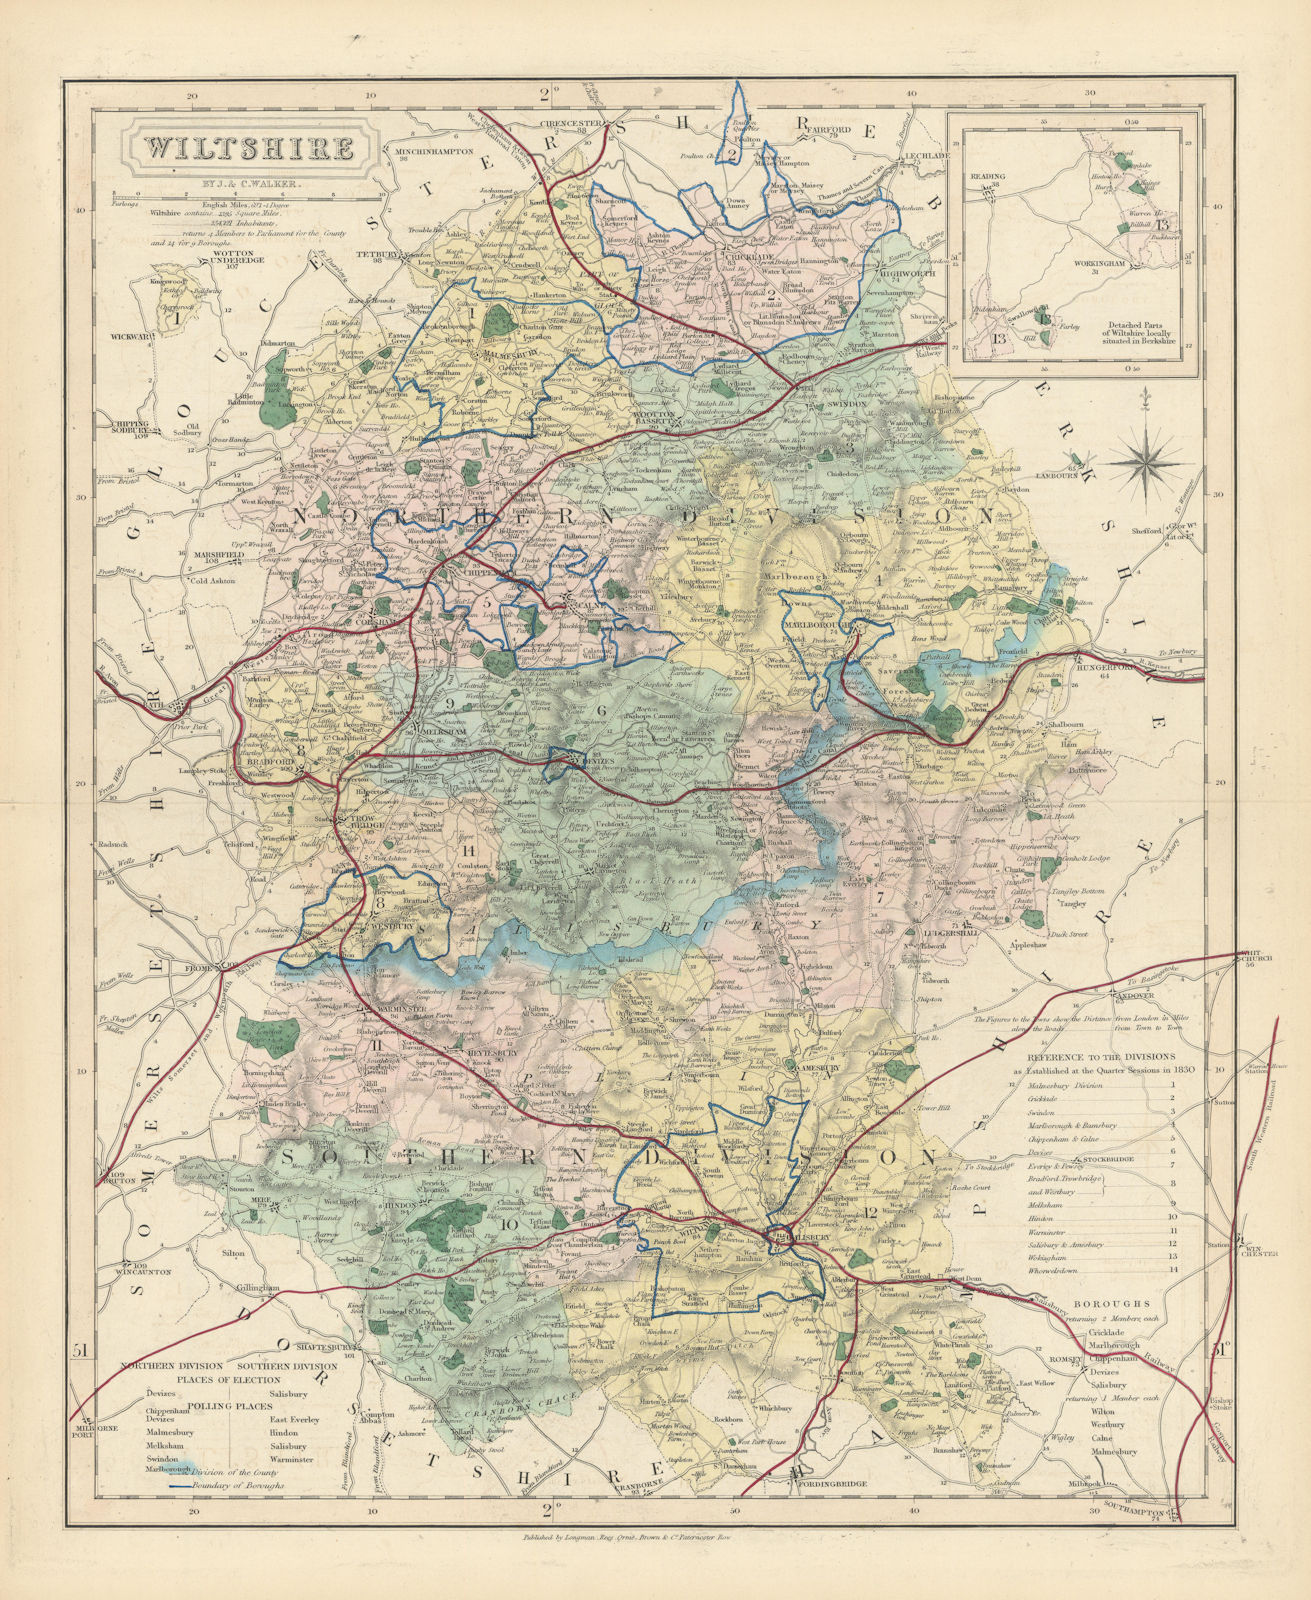 Associate Product Wiltshire antique county map by J & C Walker. Railways & boroughs 1870 old